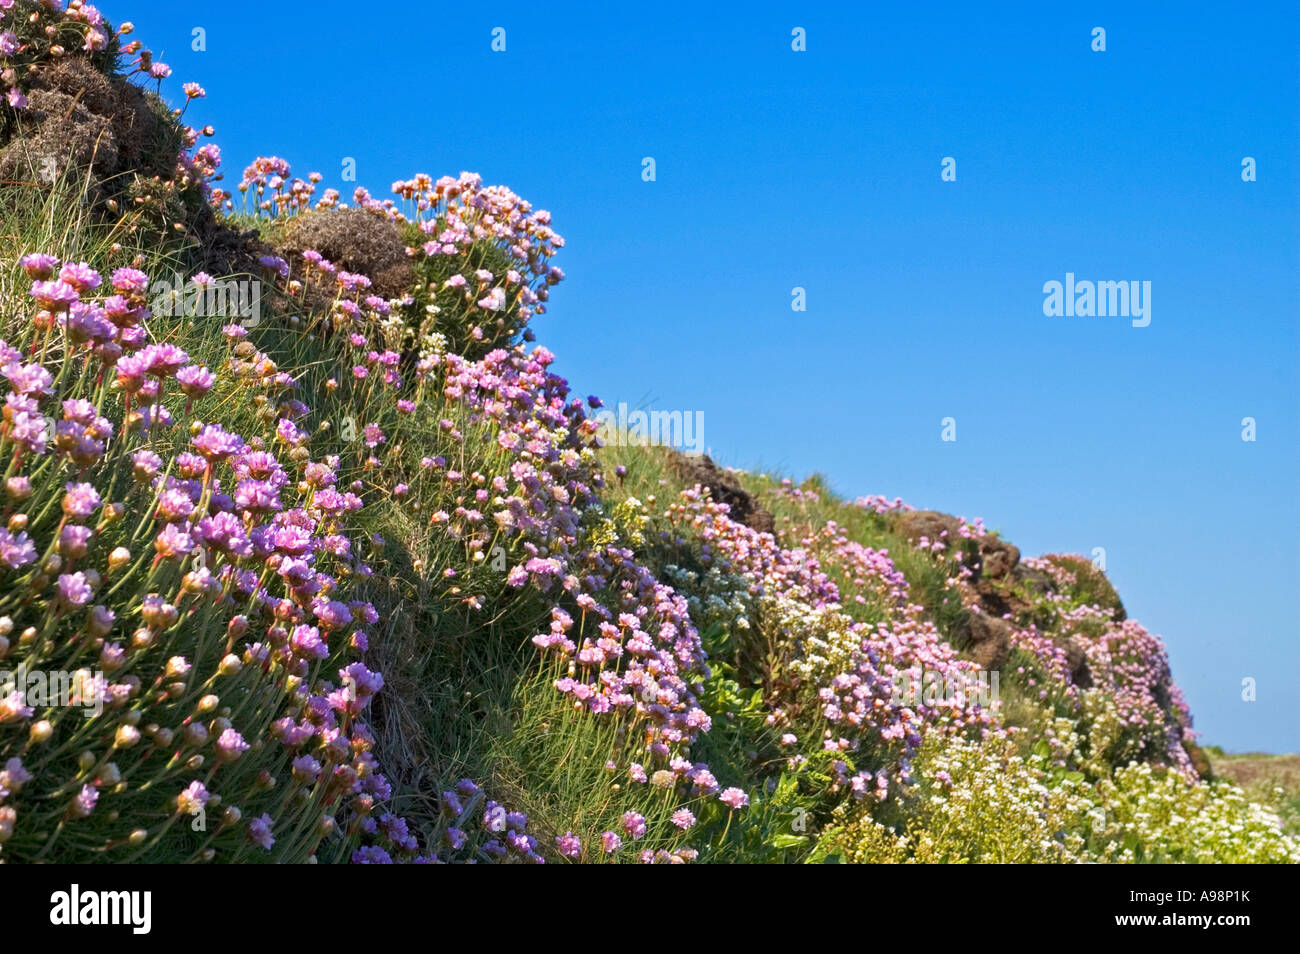 sea pinks or thrift growing on the coast of cornwall,england Stock Photo